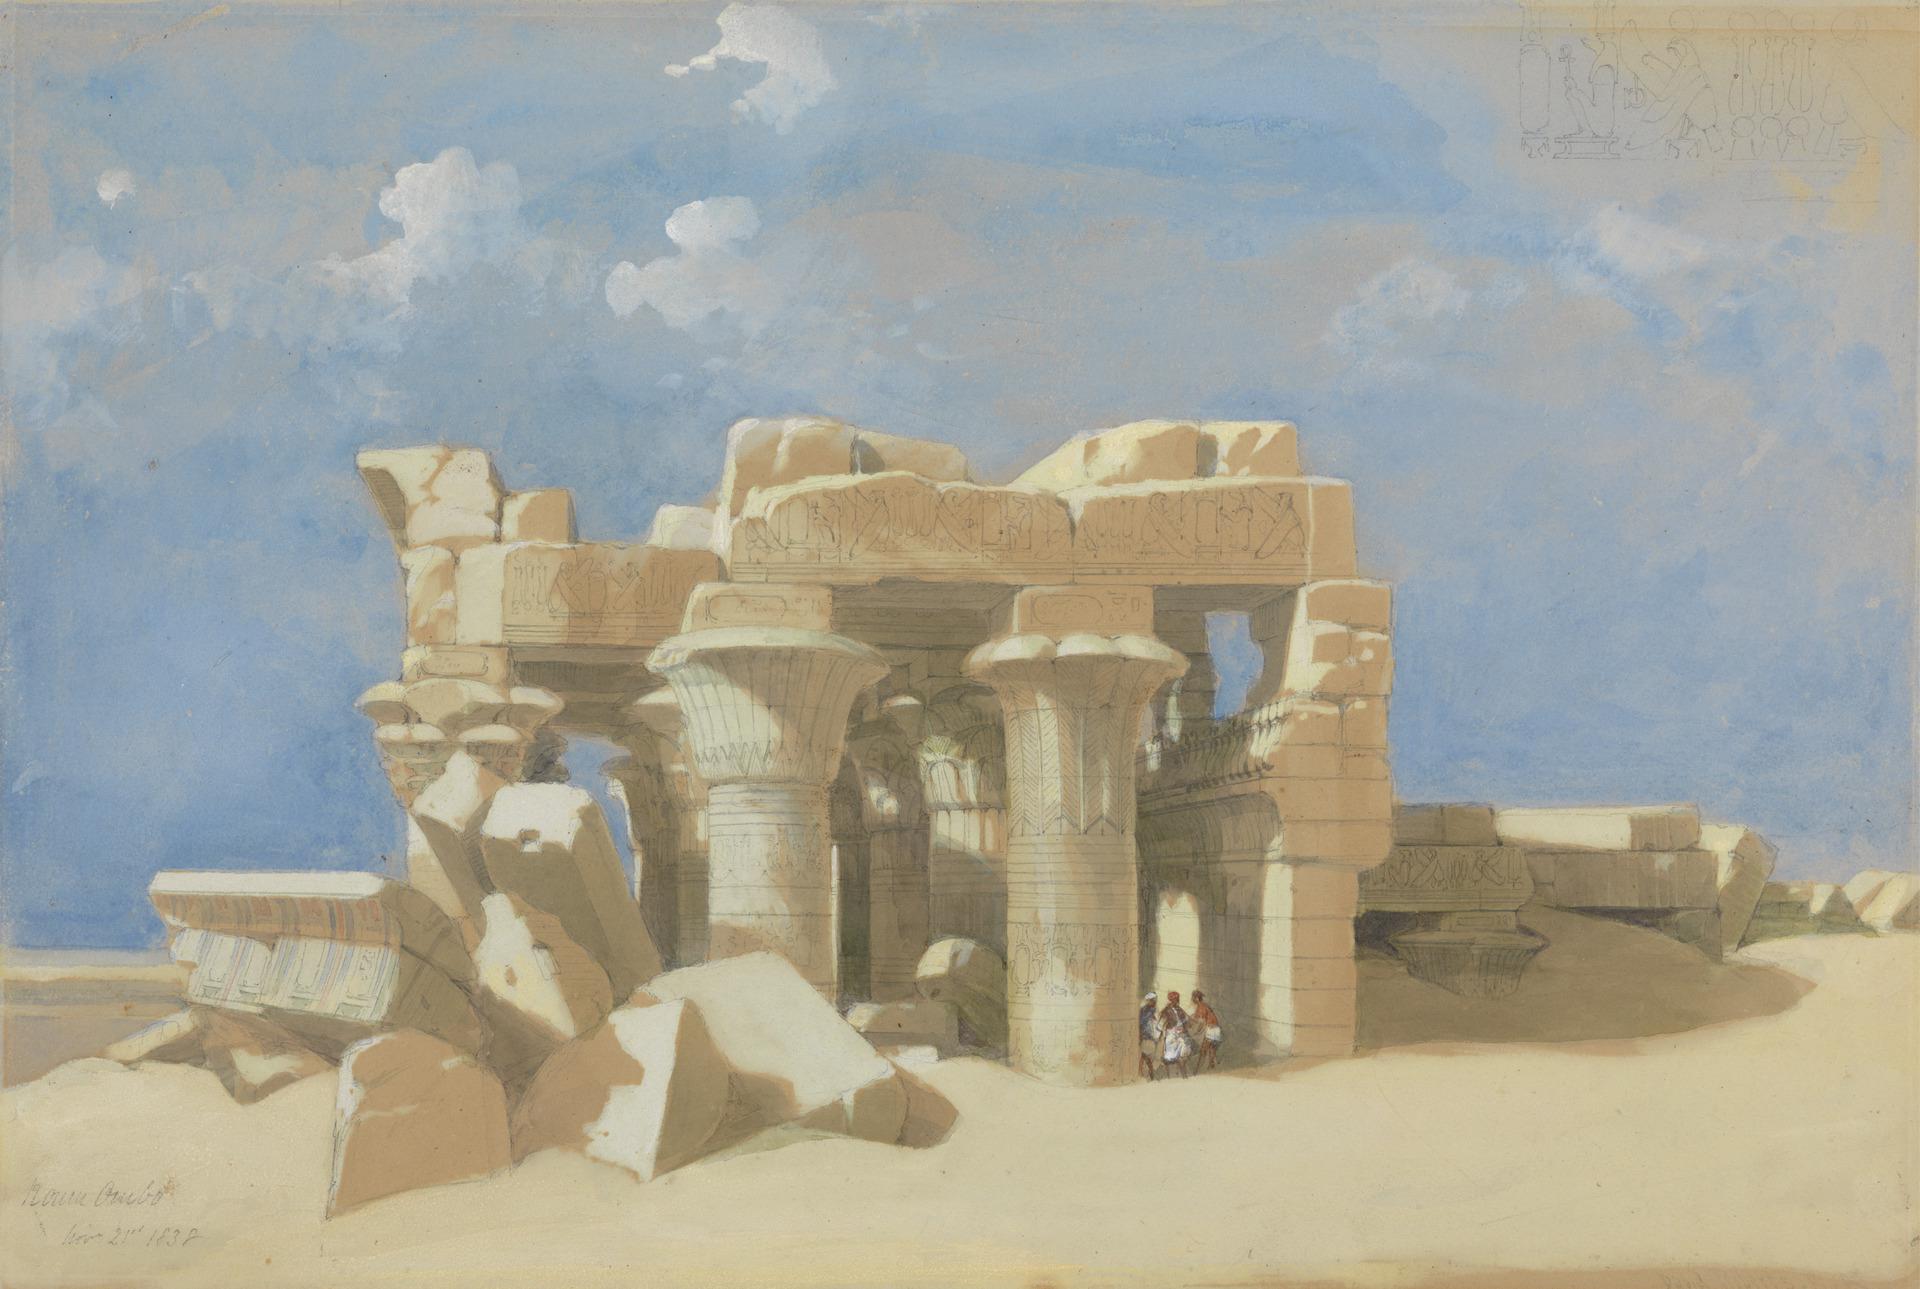 A landscape view of an Egyptian temple in a desert